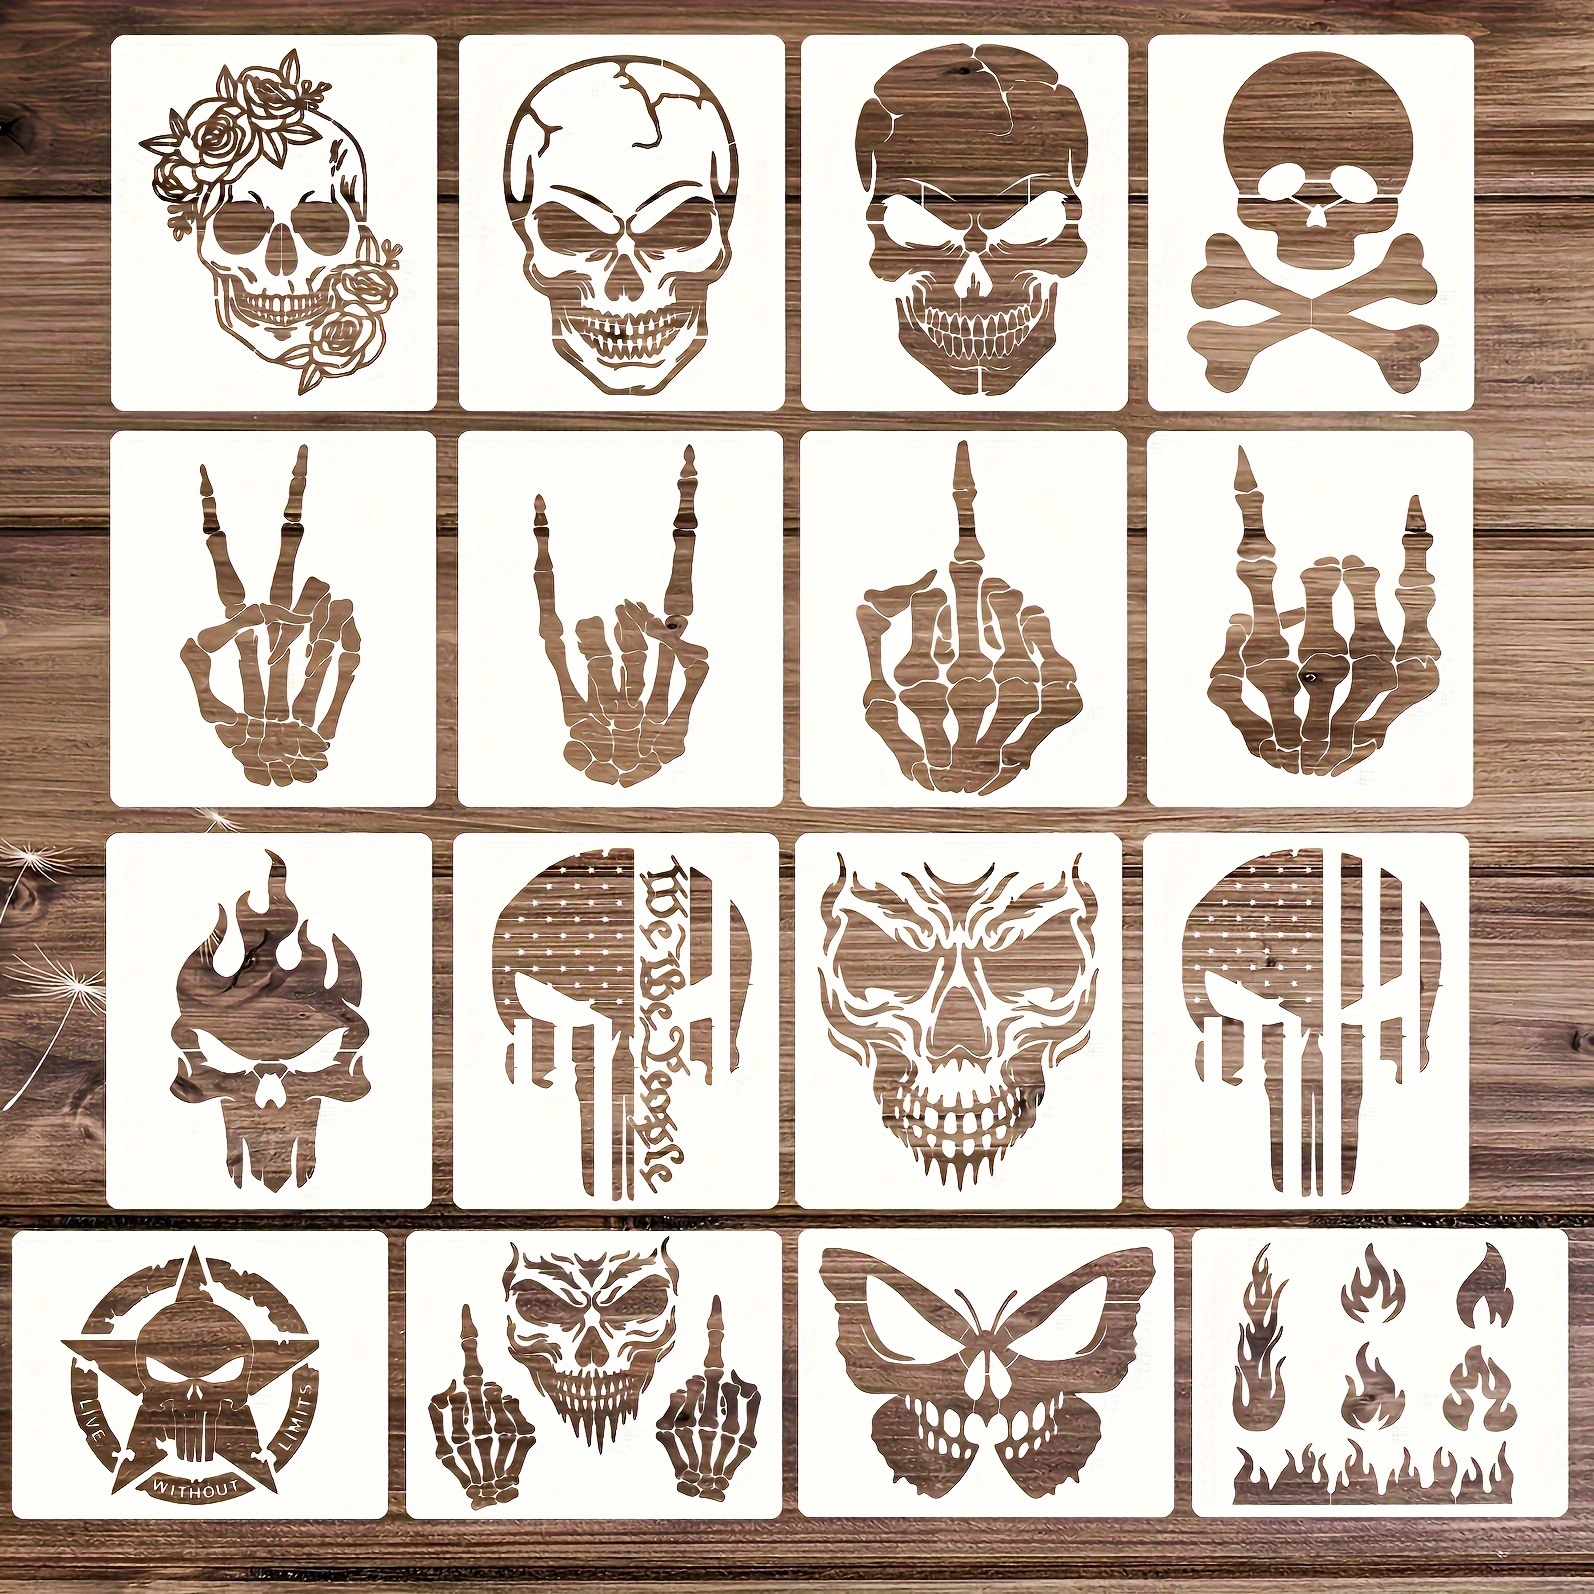 

16pcs Stencils For Painting On Wood Flame Skeleton Hand Finger Fire Templates For Airbrushing Art Crafts Plastic Reusable Wood Burning Stencils